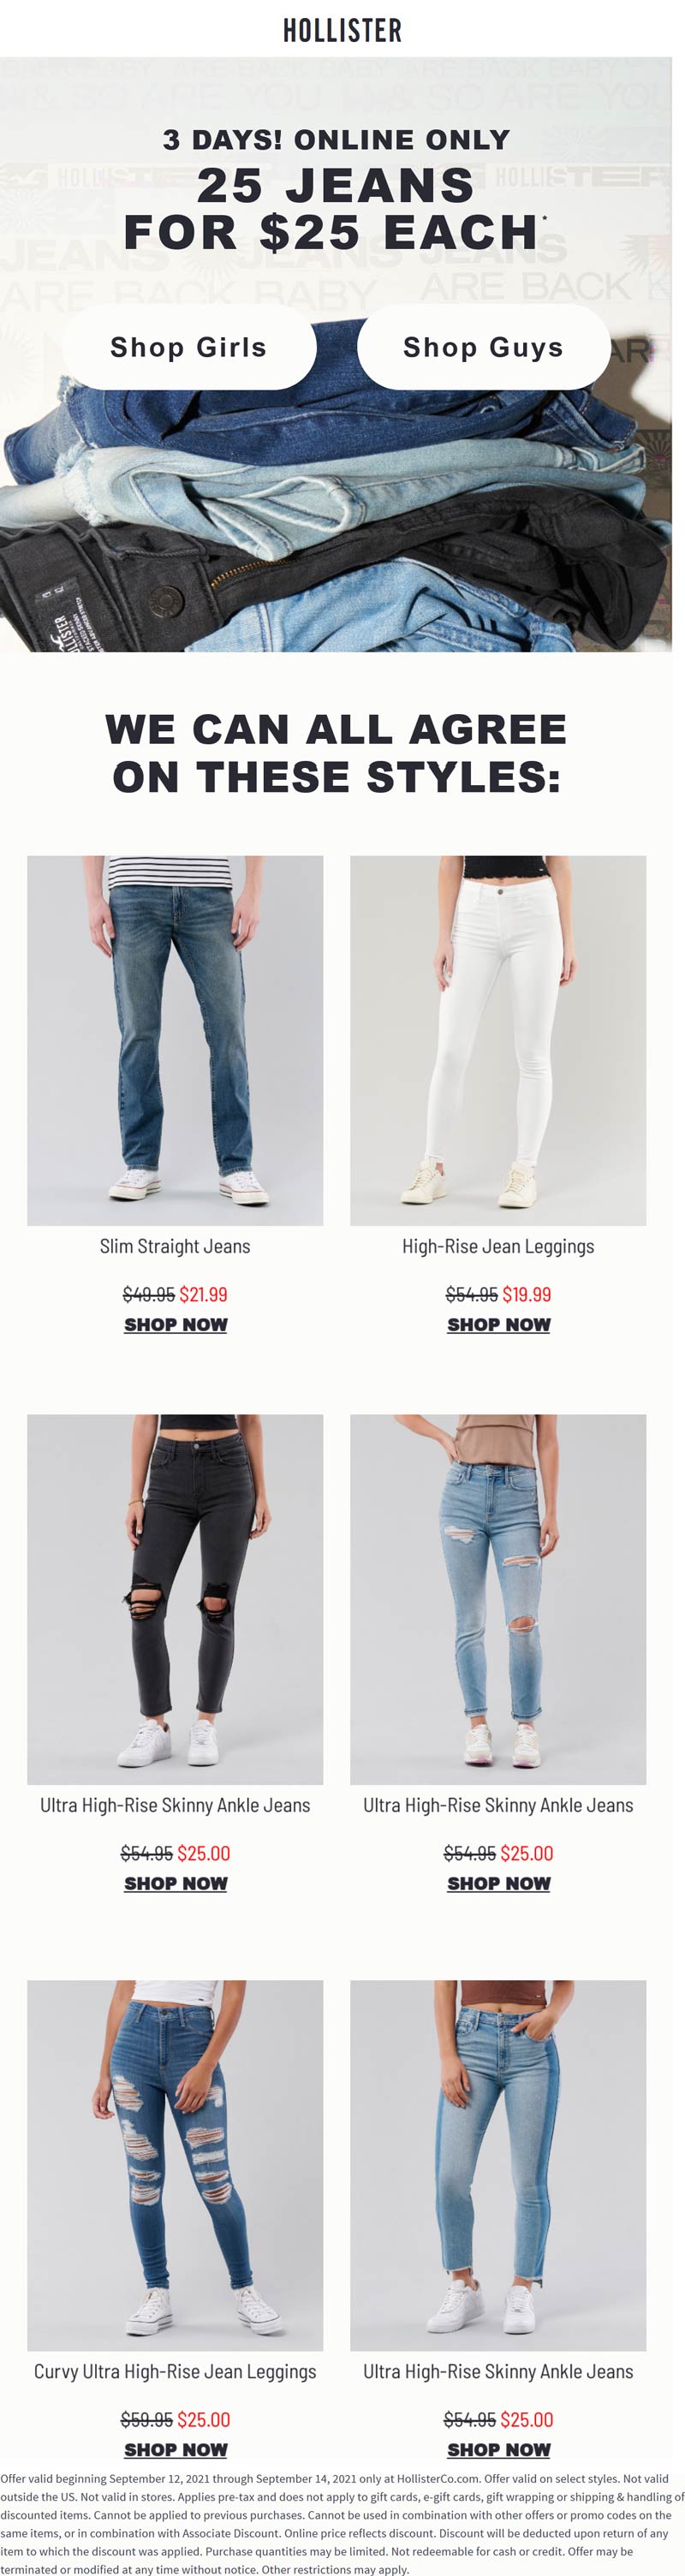 Hollister stores Coupon  25 jean styles for $25 online at Hollister #hollister 